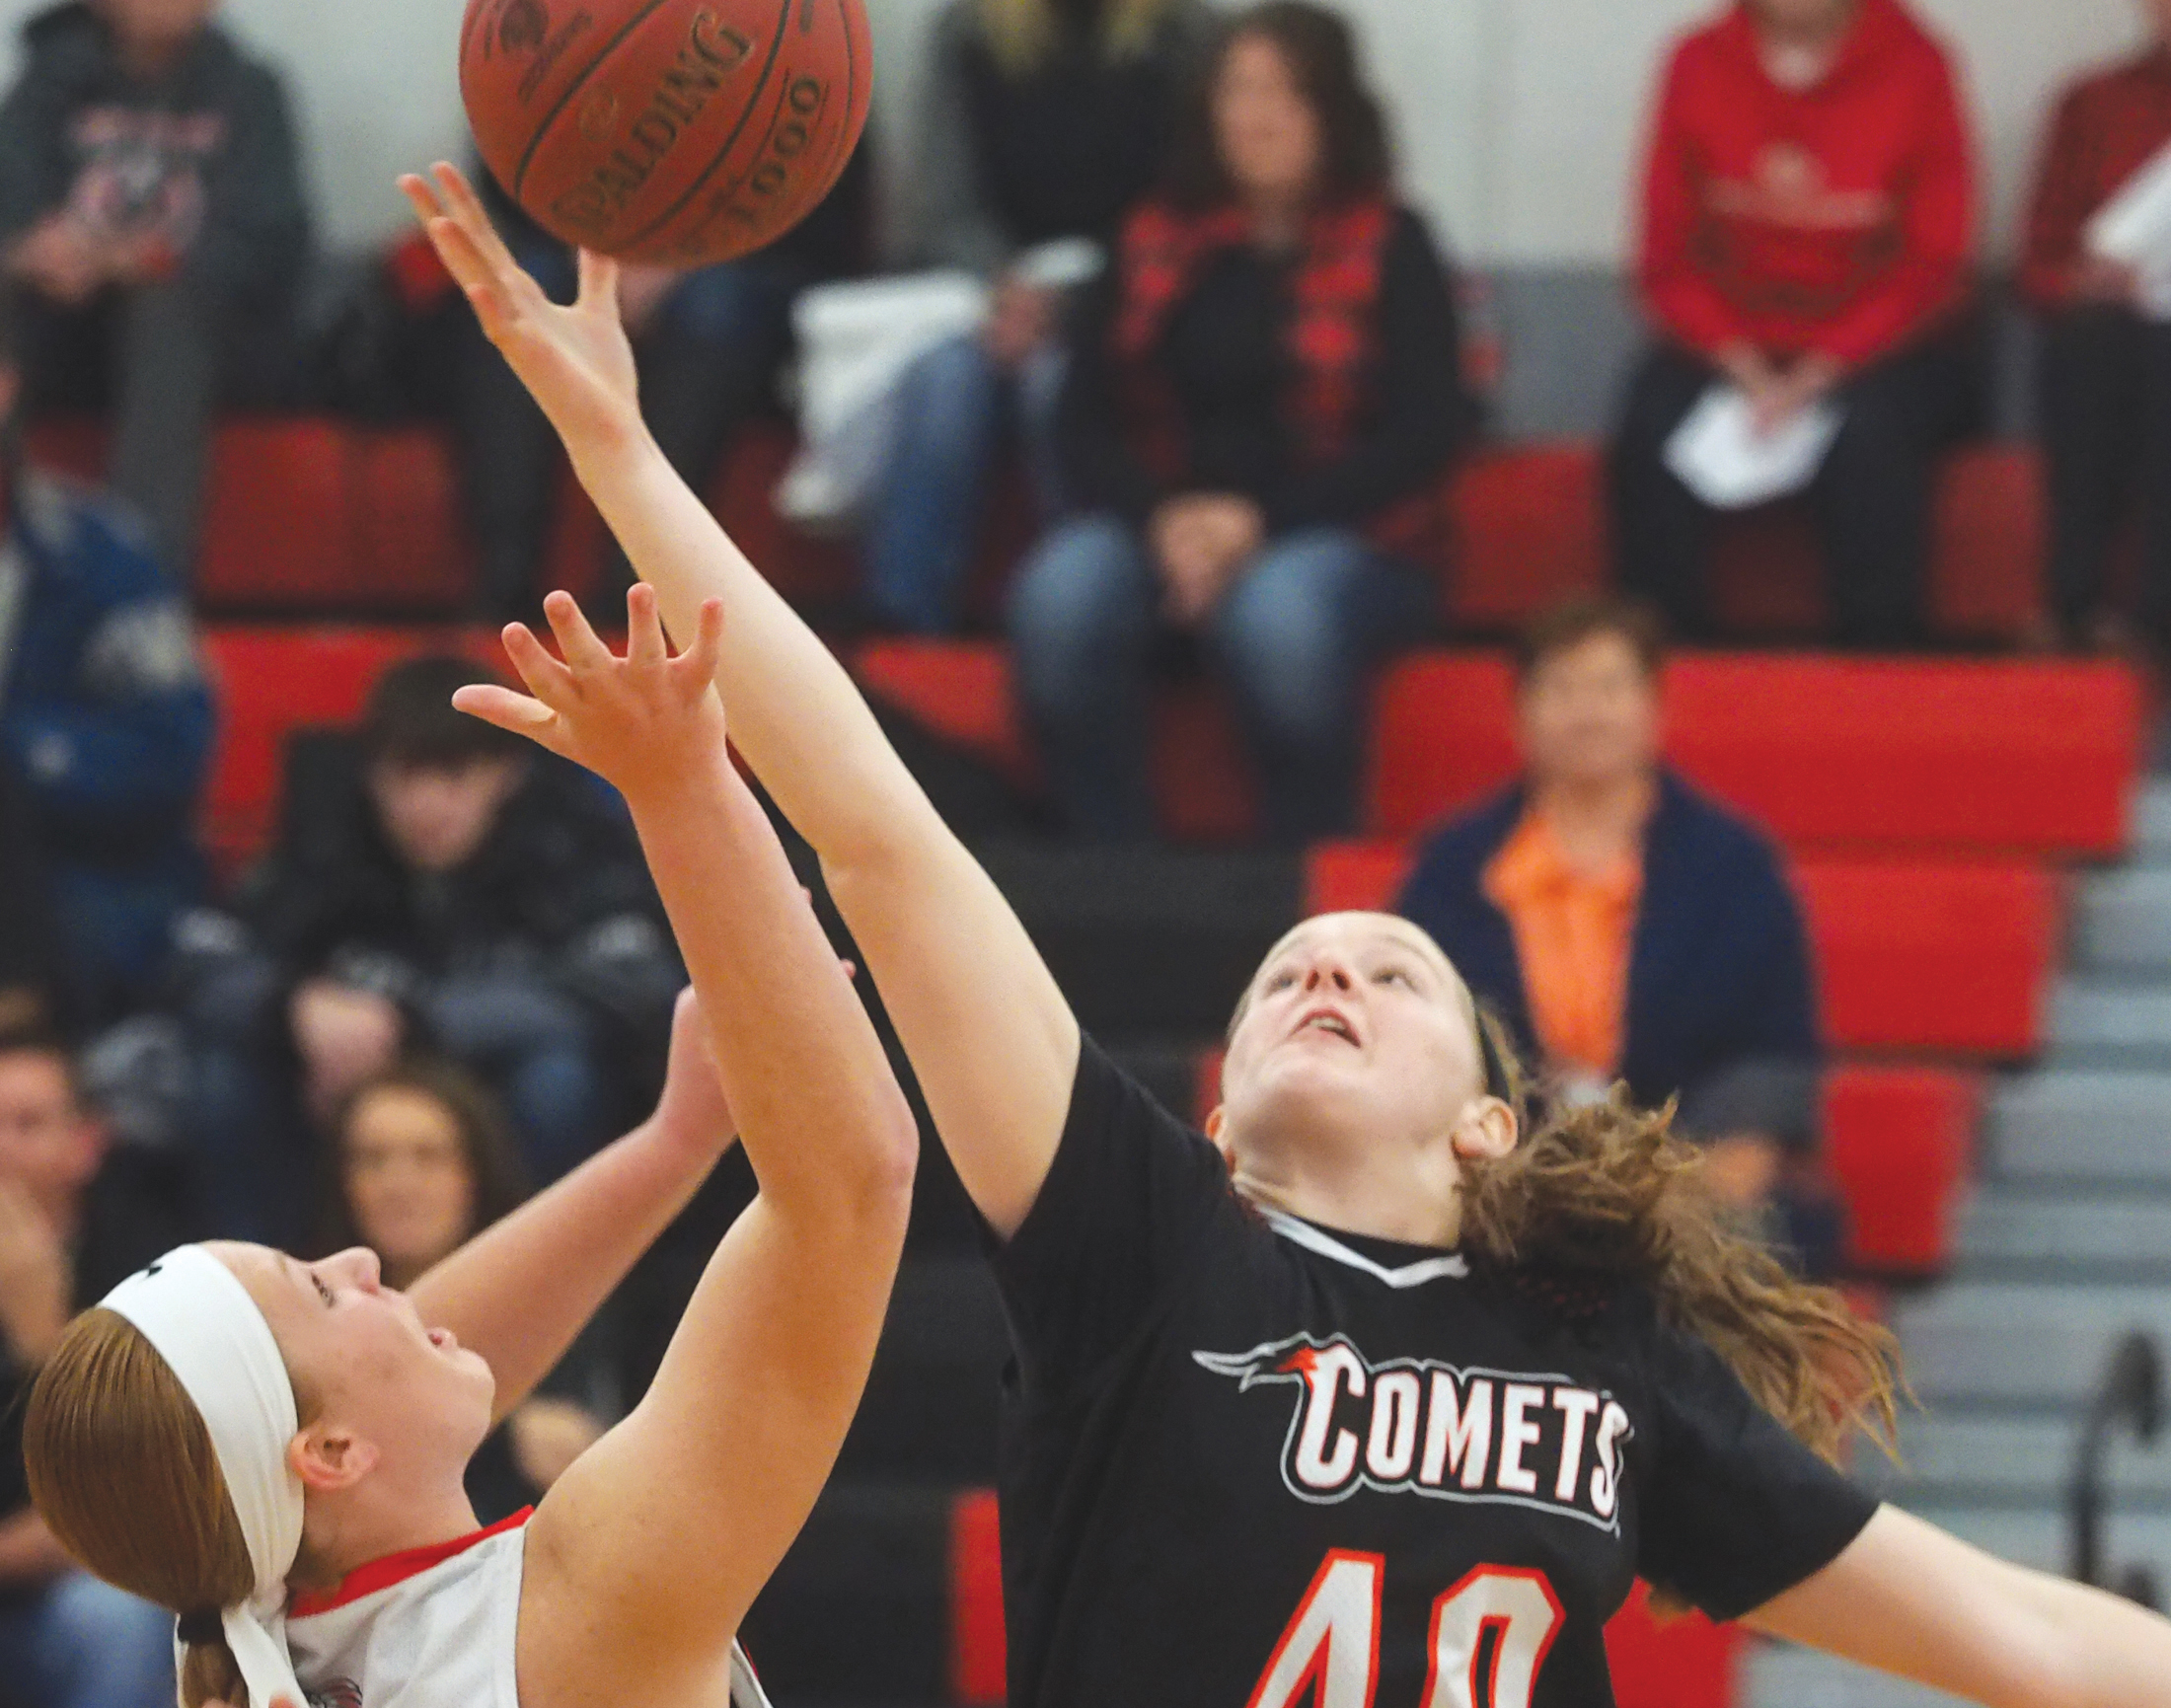 Comets Sindlinger, Reams selected to All-NEIC teams